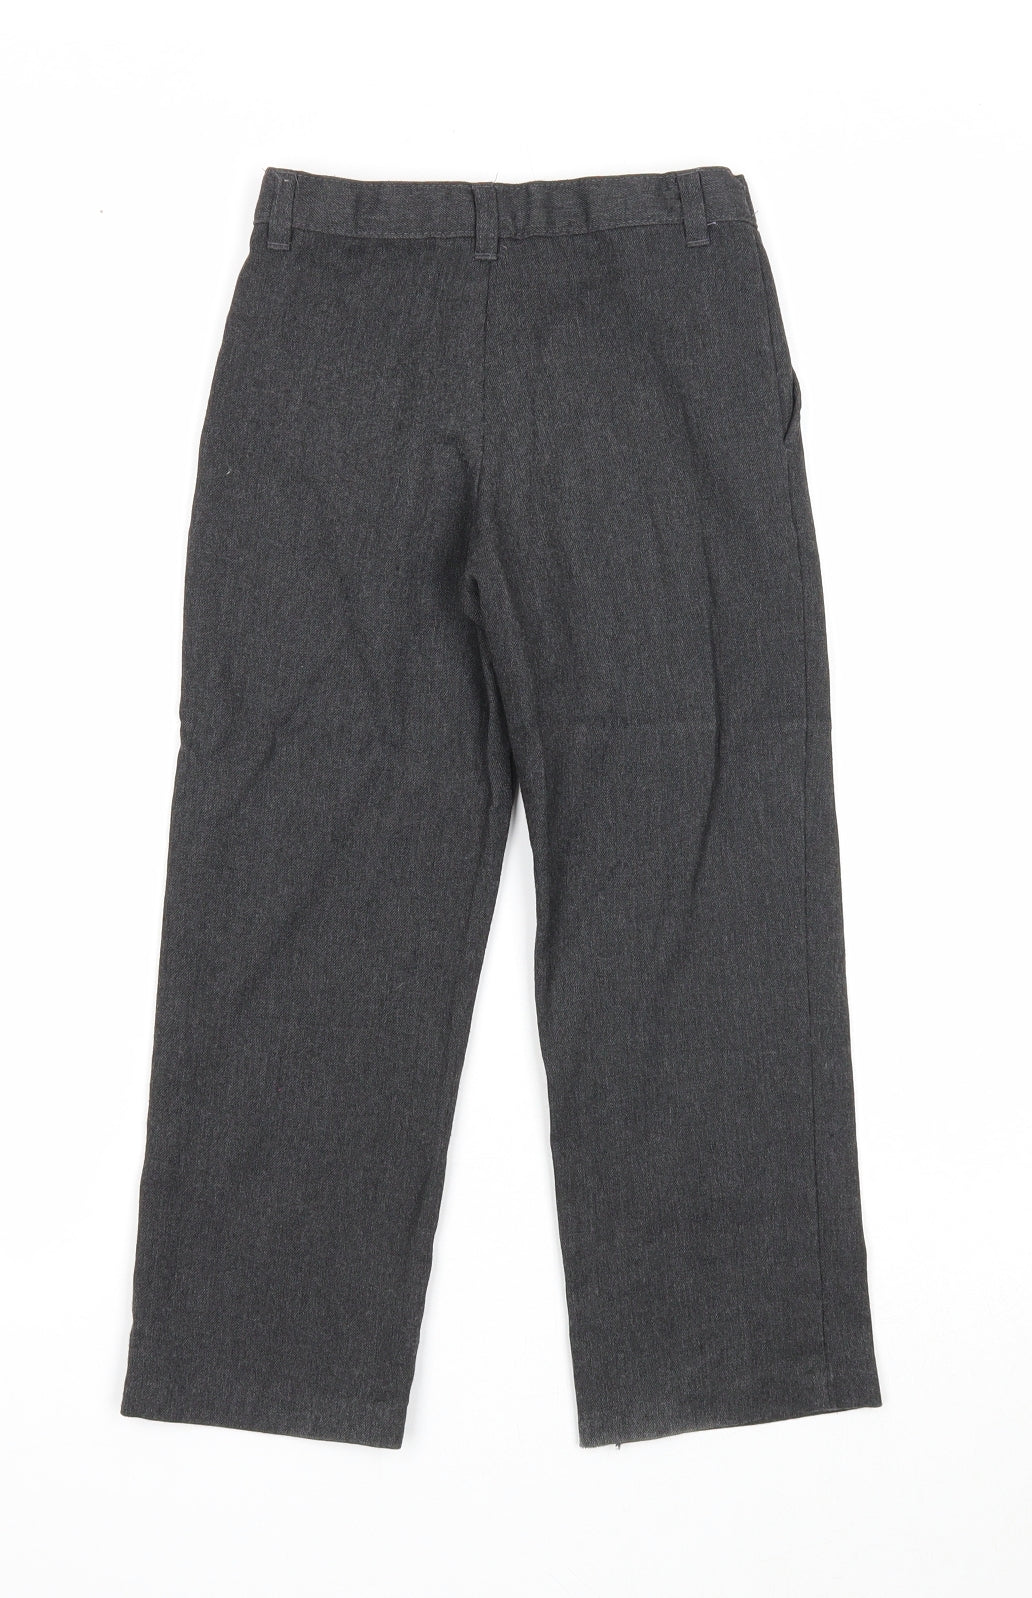 George Boys Grey Polyester Chino Trousers Size 5-6 Years Regular Pullover